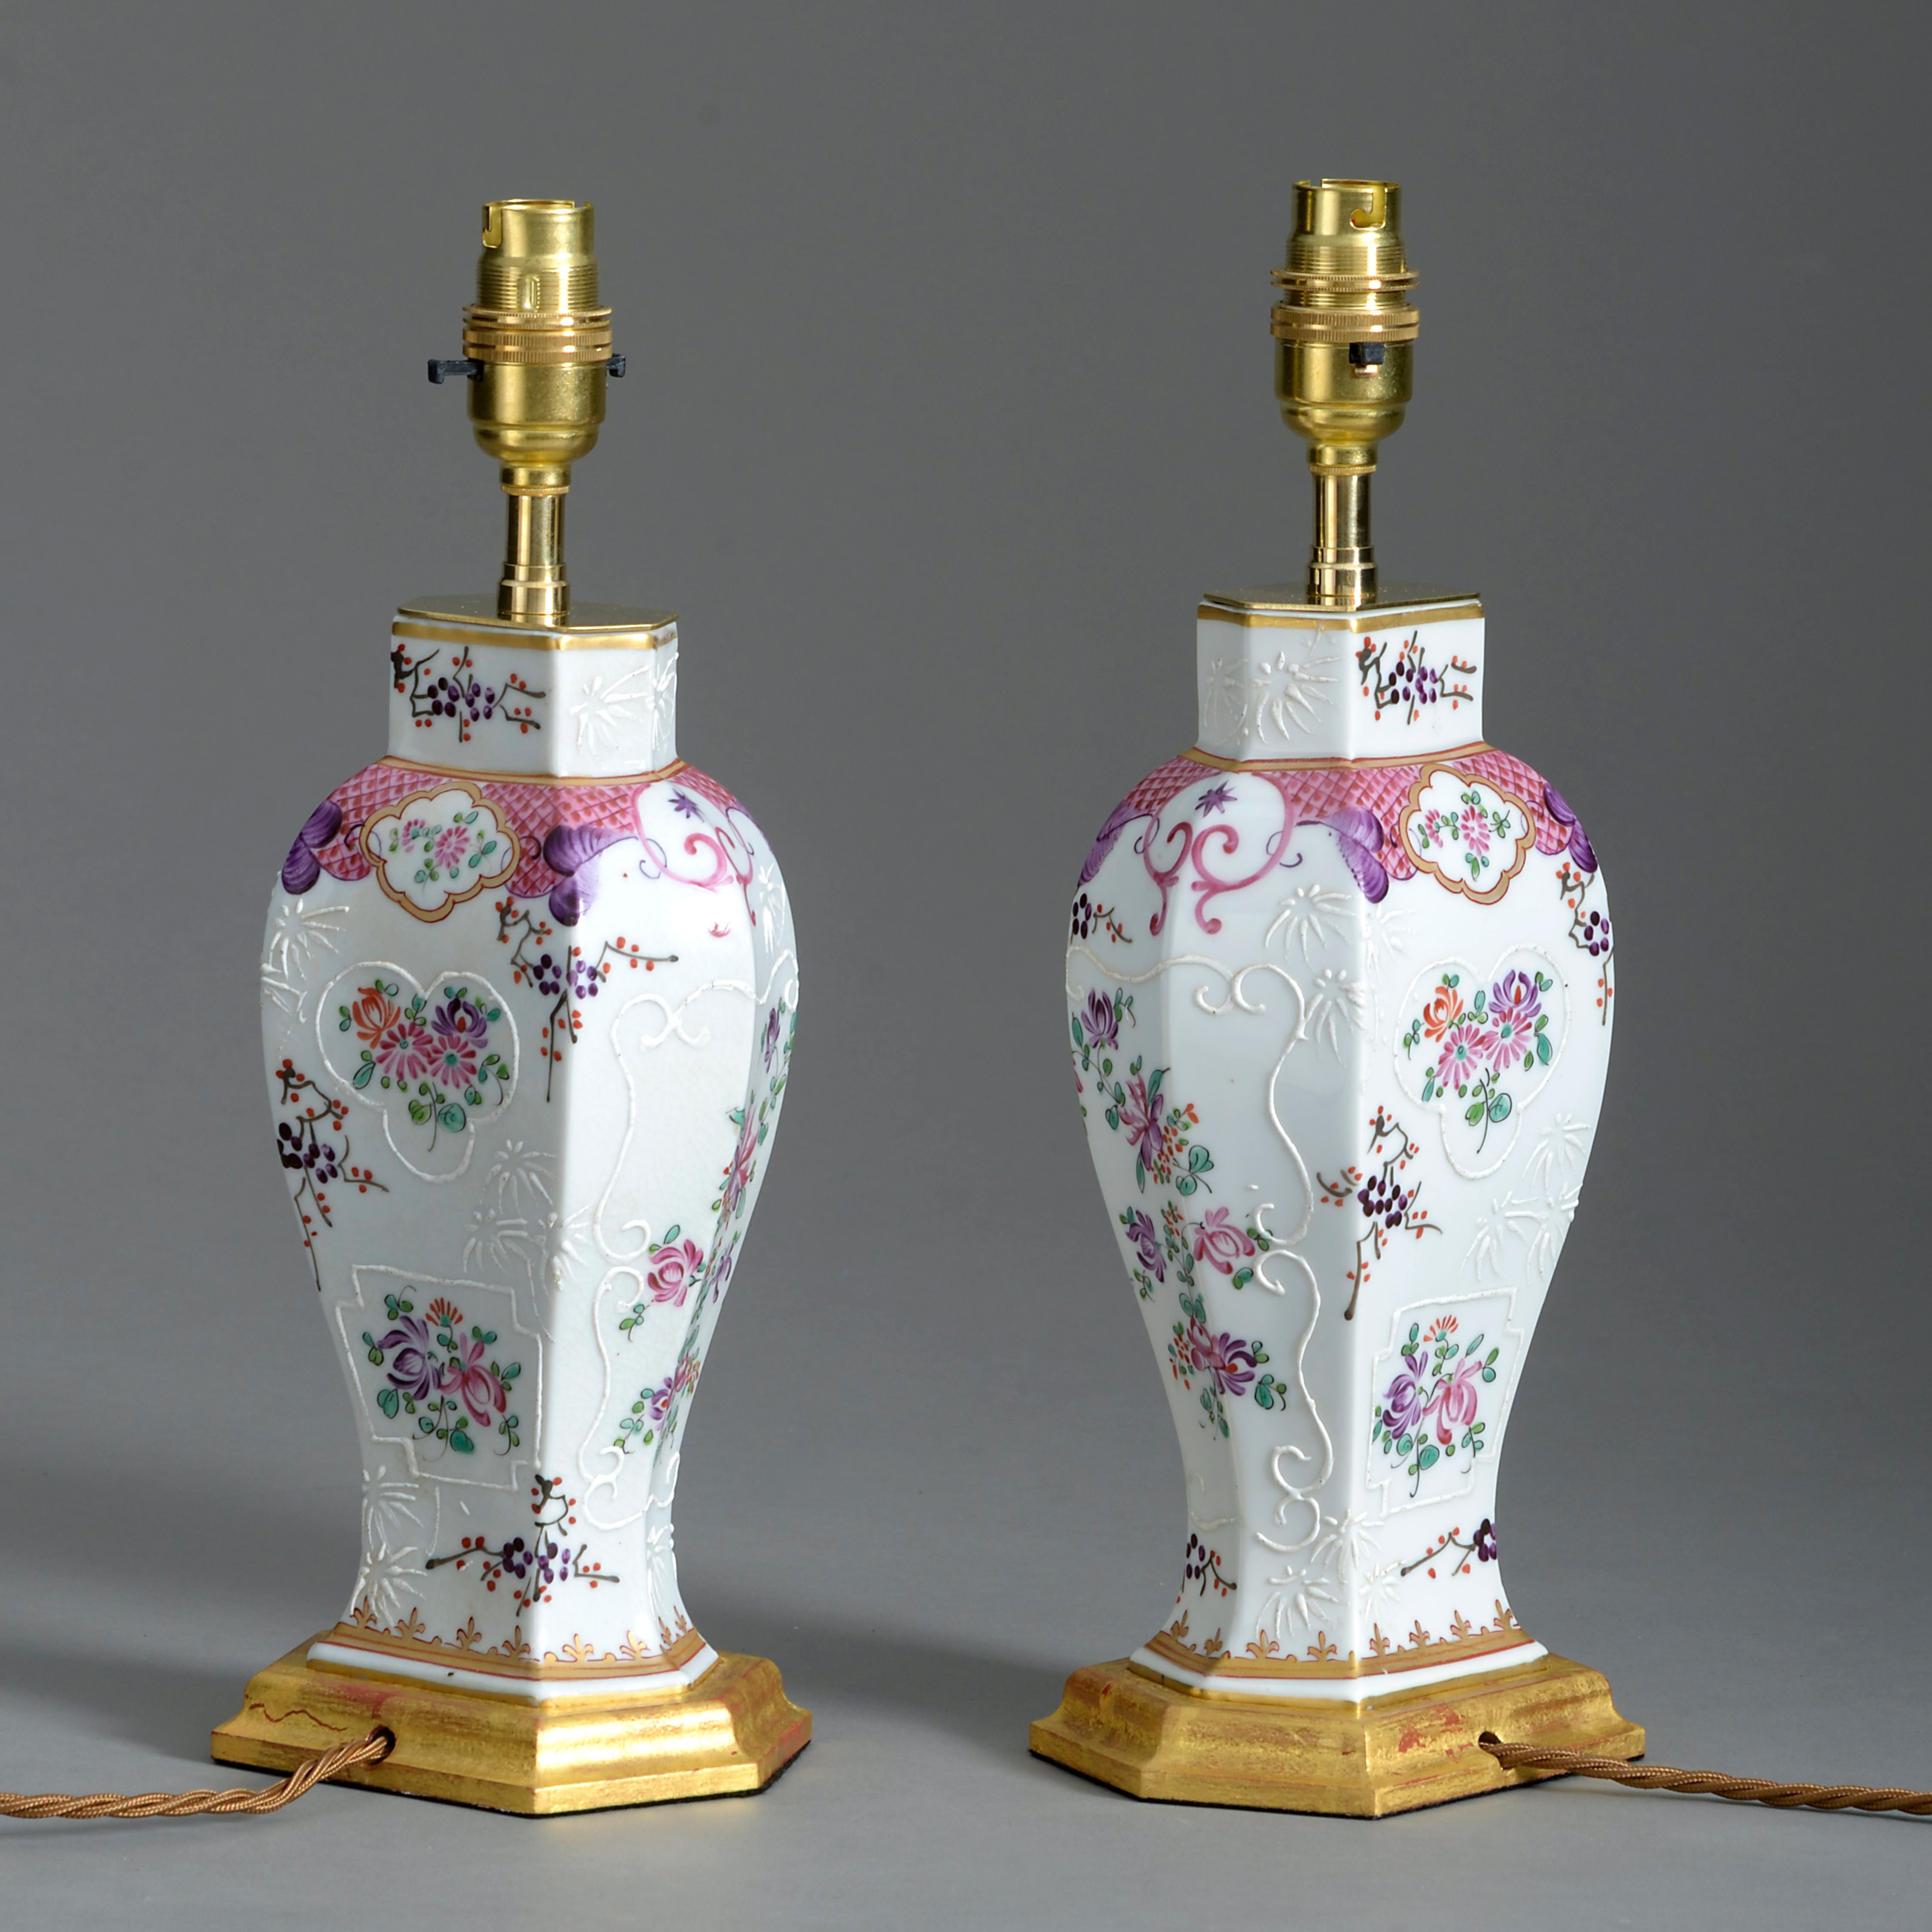 Chinese Export Pair of 19th Century Samson Famille Rose Porcelain Vase Lamps